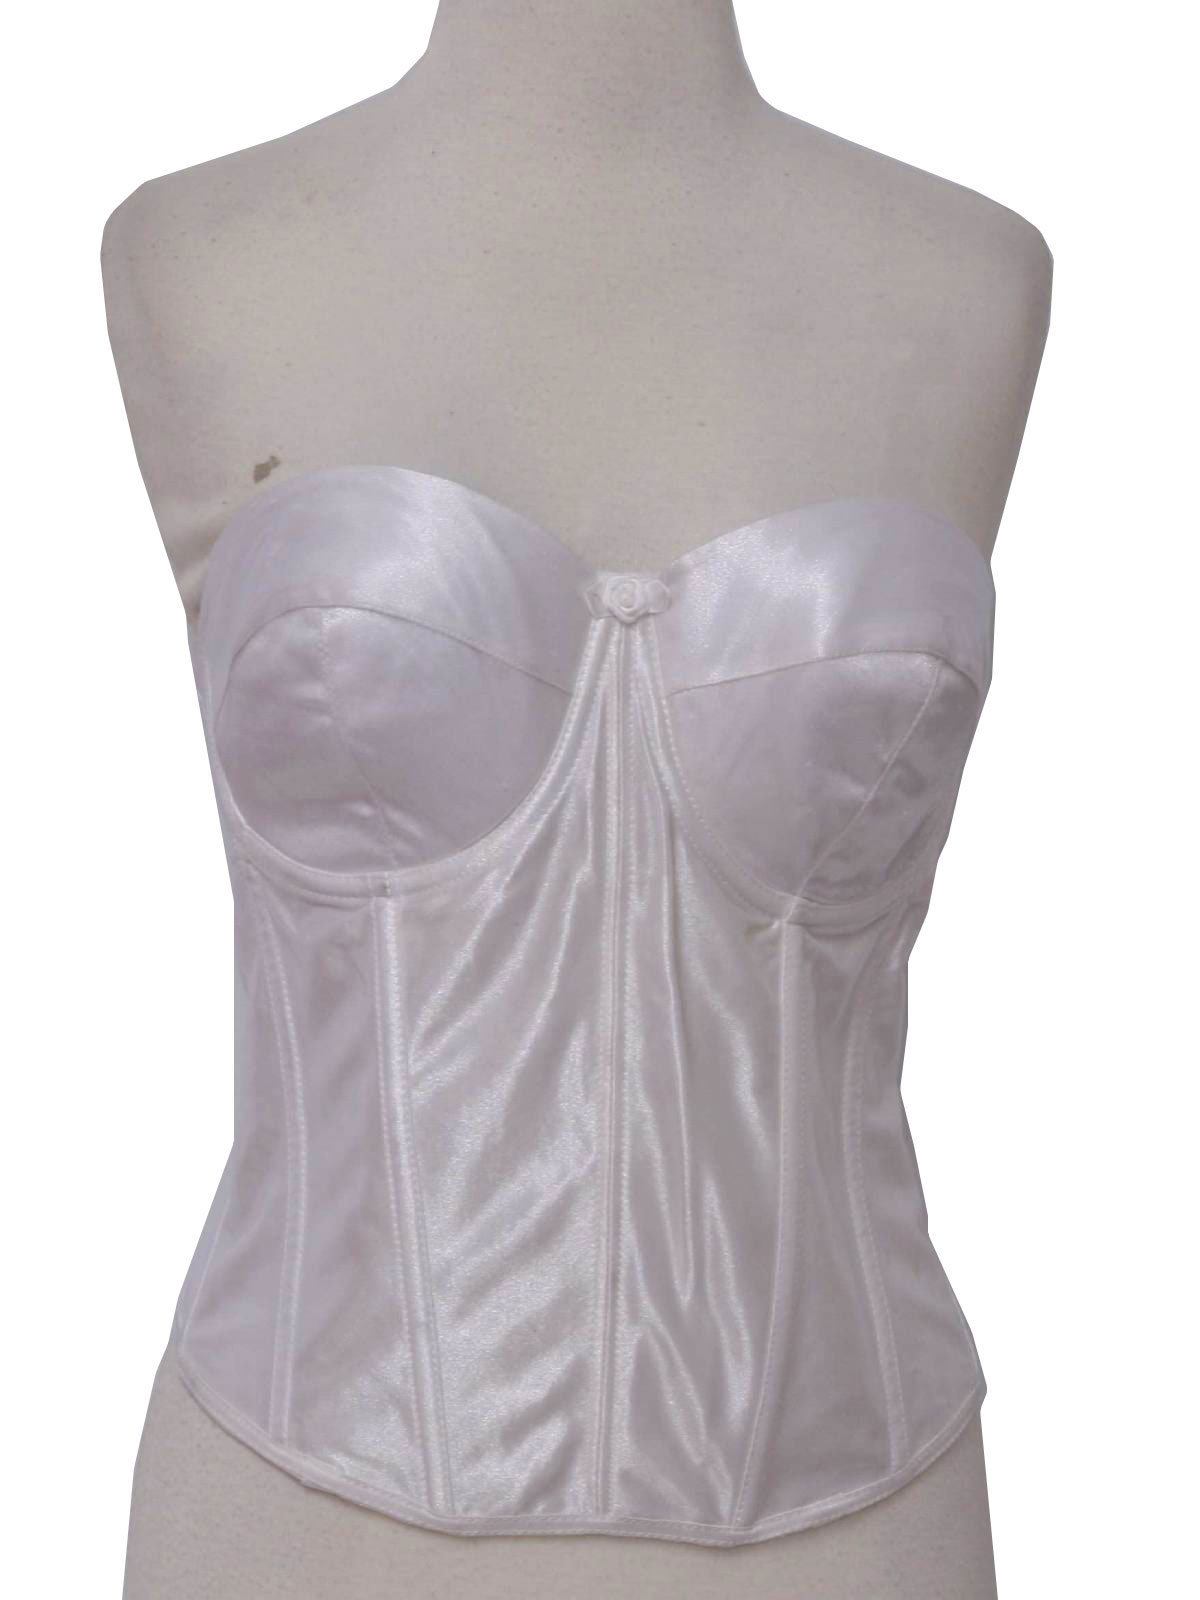 1990 s womens lingerie bustier $ 24 00 in stock item no 252332 90s ...